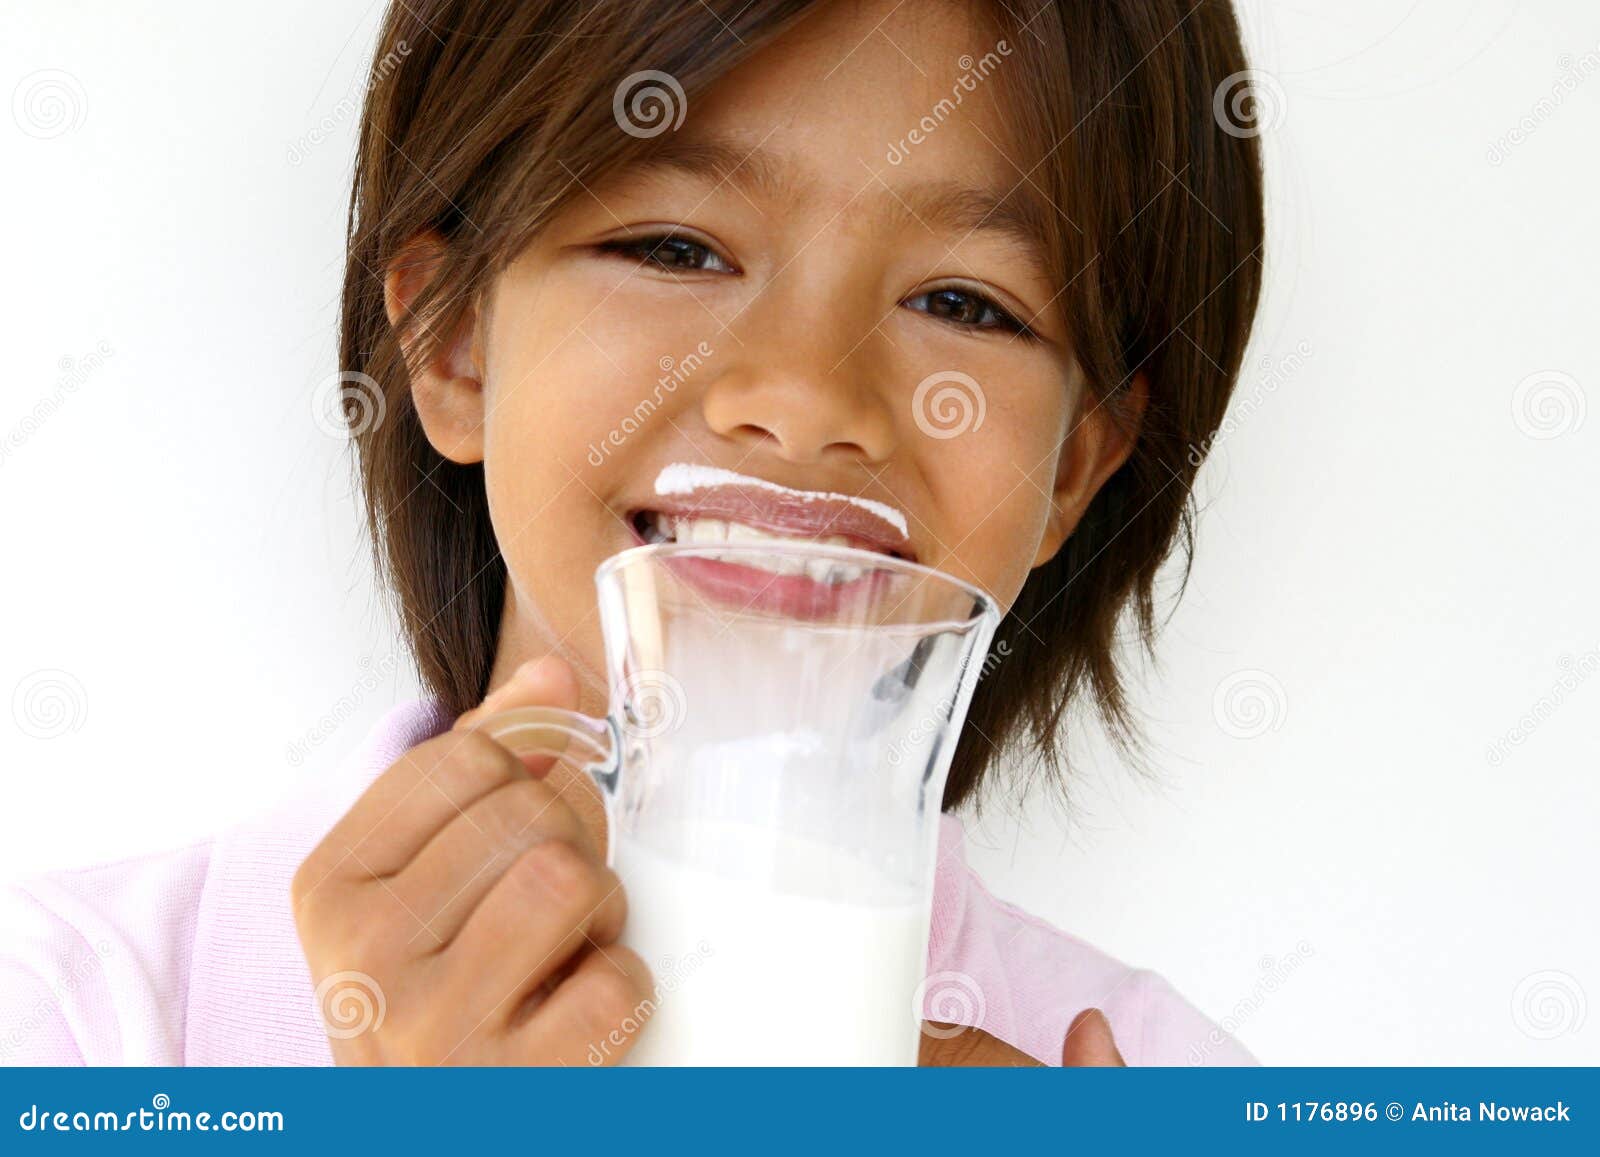 girl with milk moustache